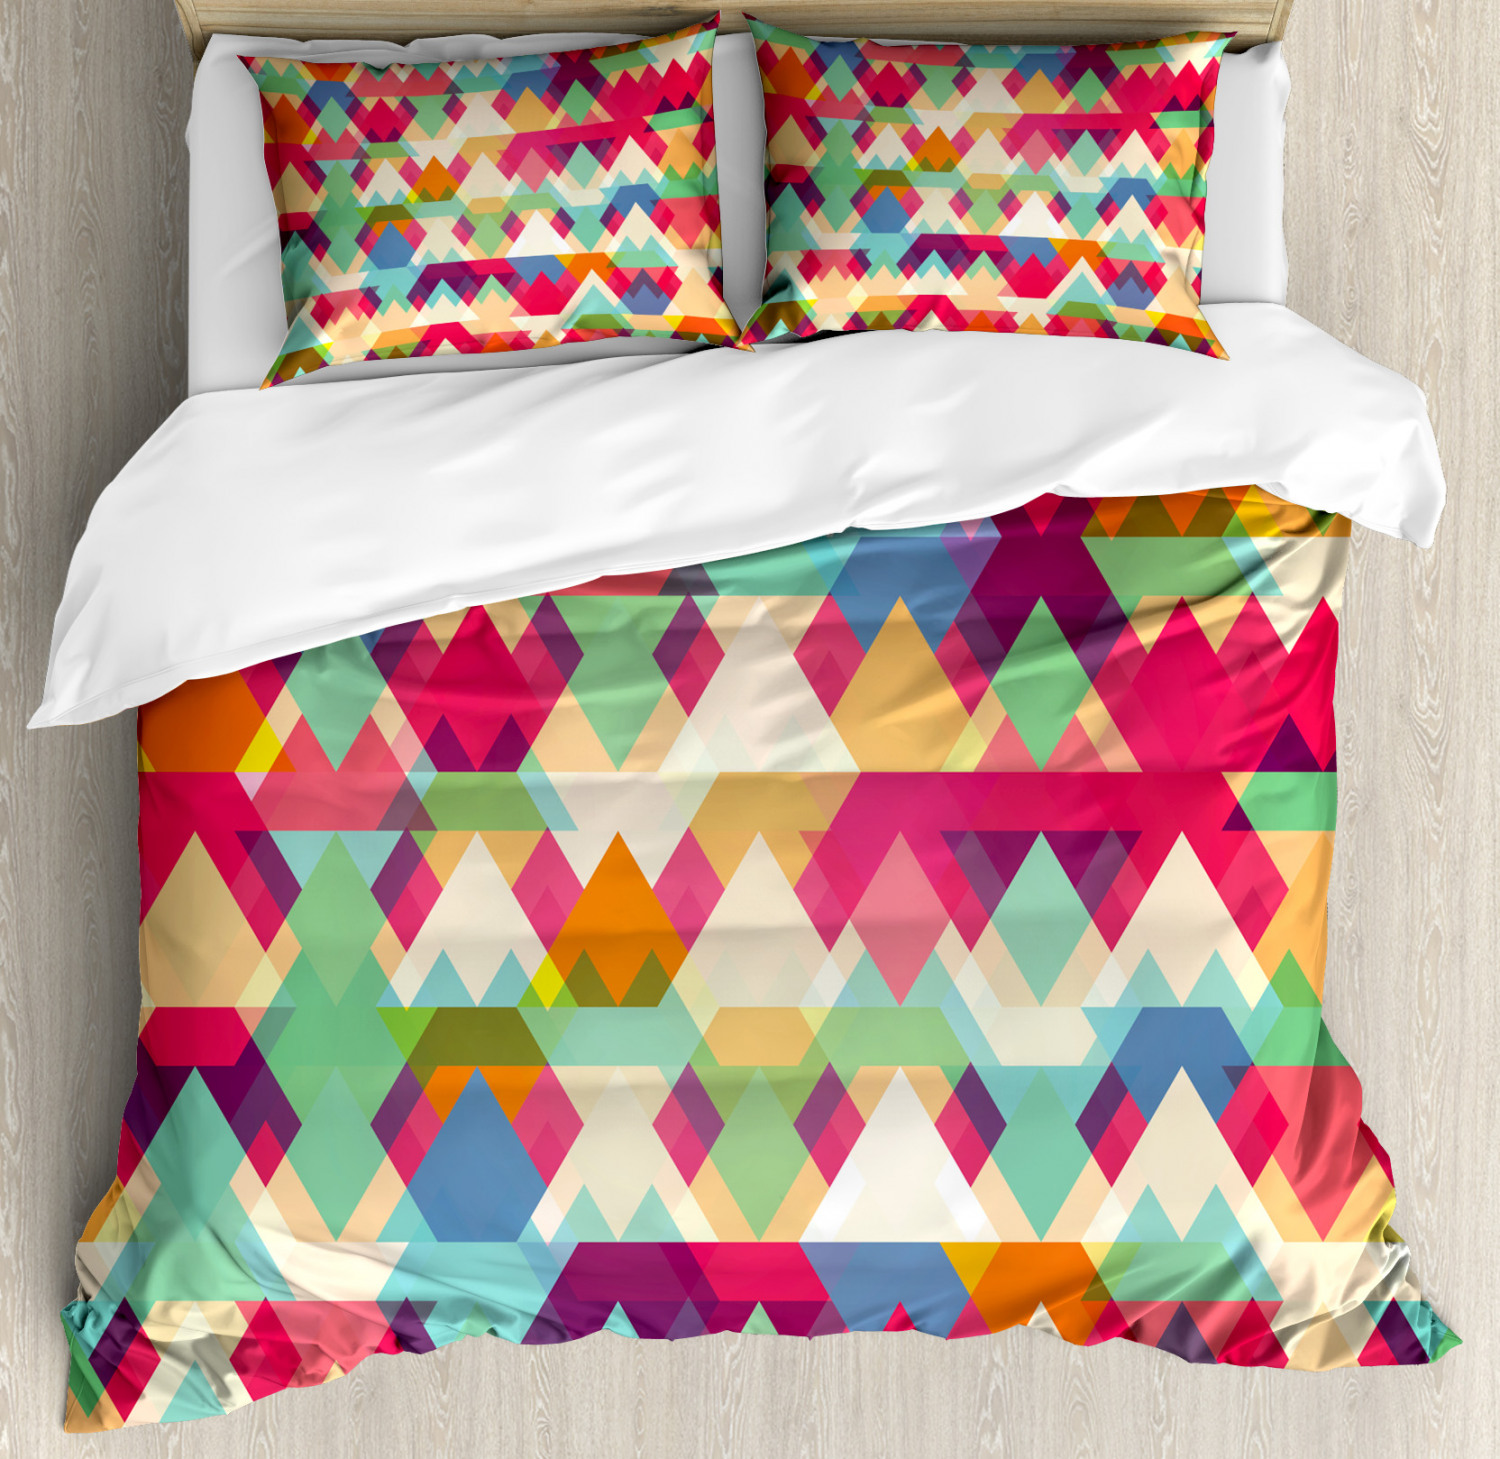 Indie Duvet Cover Set With Pillow Shams Colorful Triangles Artsy